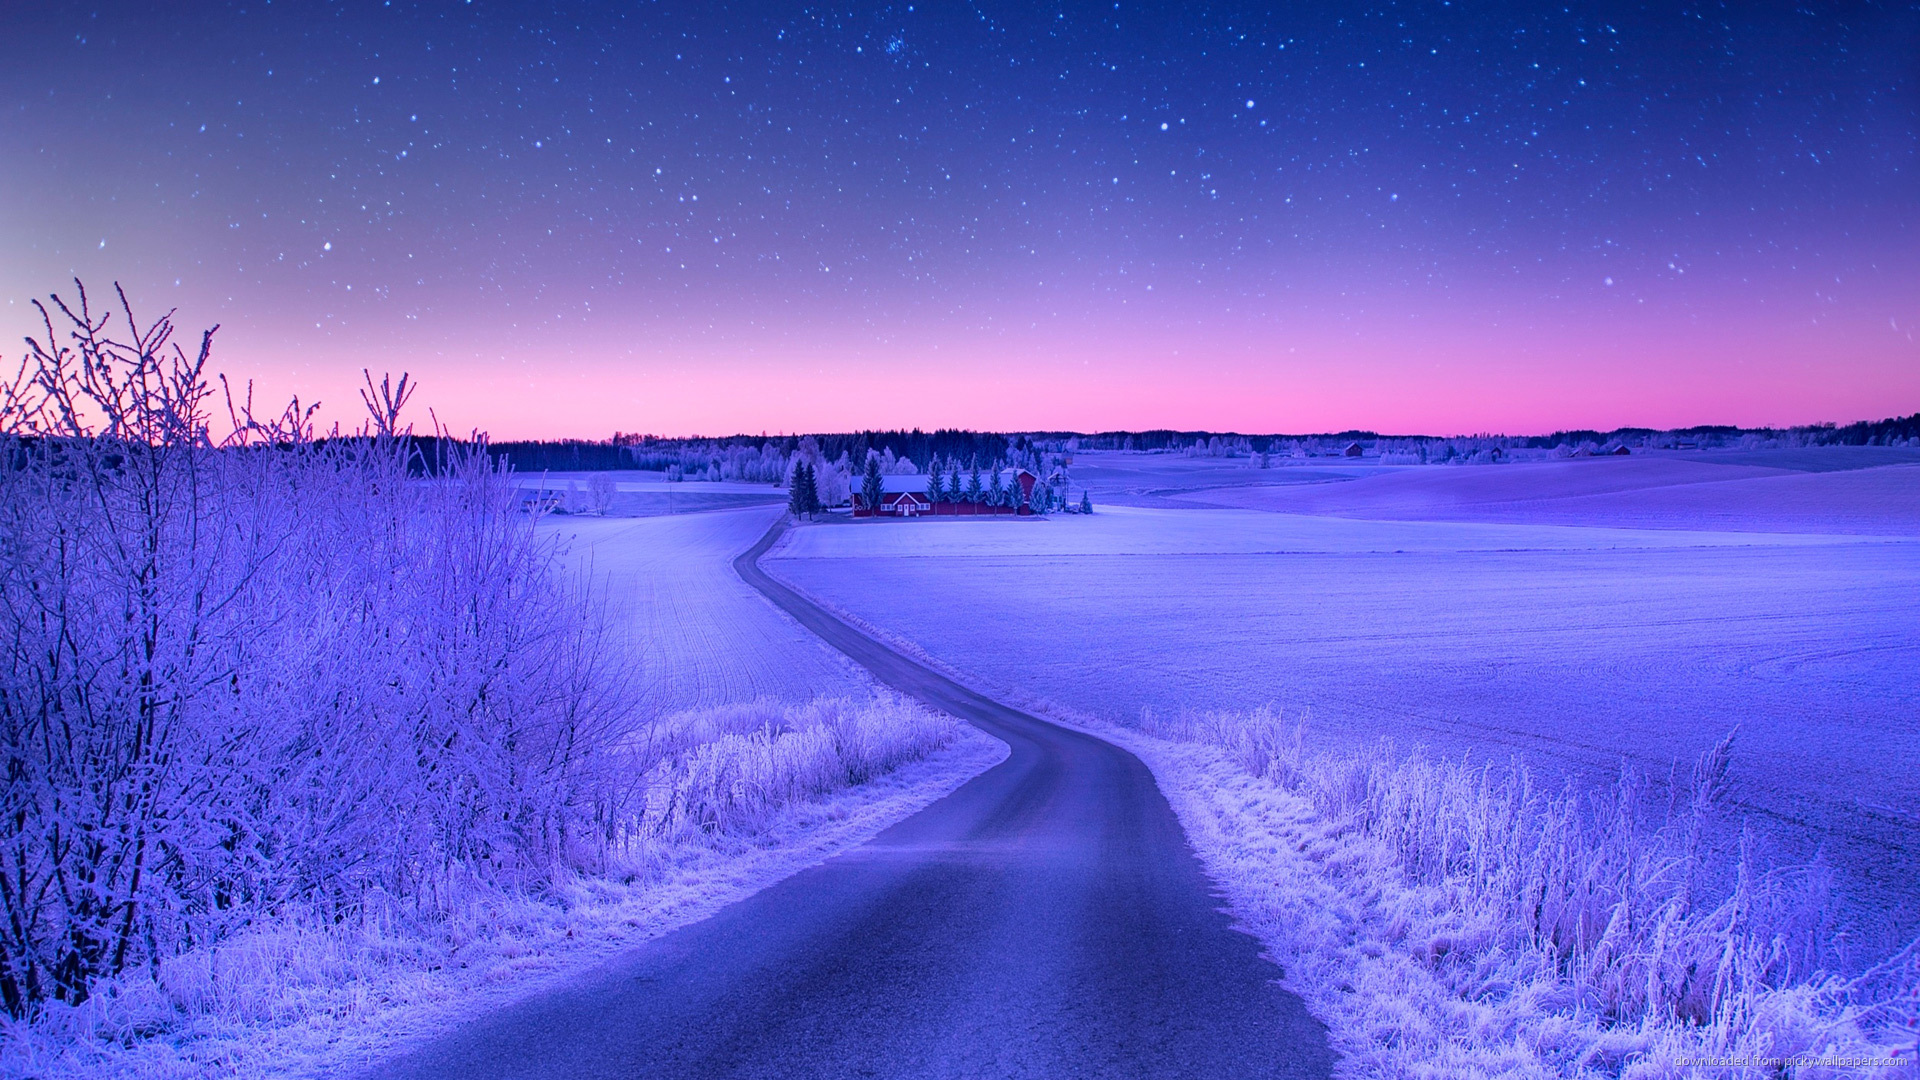 Winter Road Wallpaper Picture For iPhone Blackberry iPad Beautiful